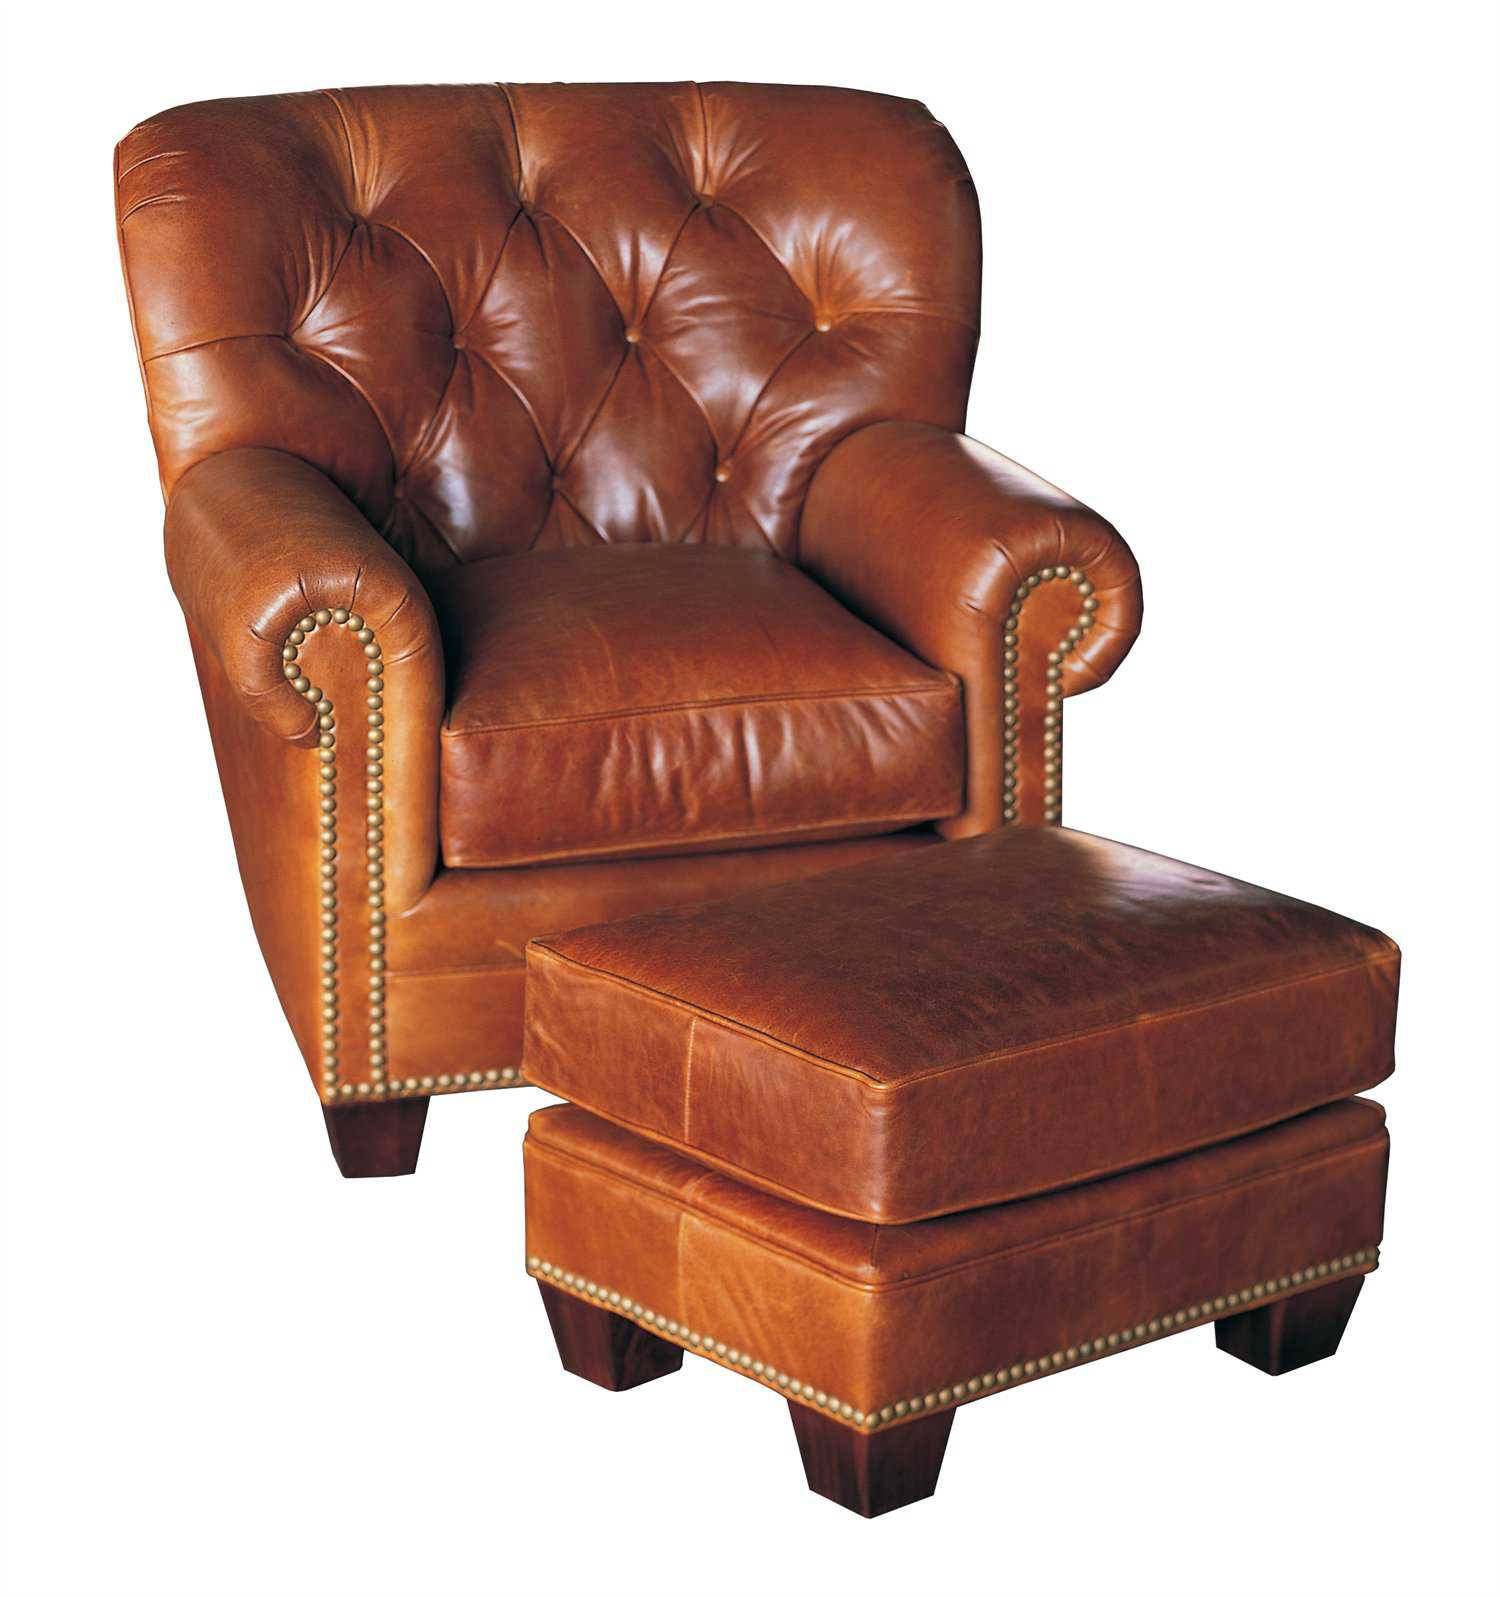 Classic Leather Fireside Tufted Back Club Chair | CL117786